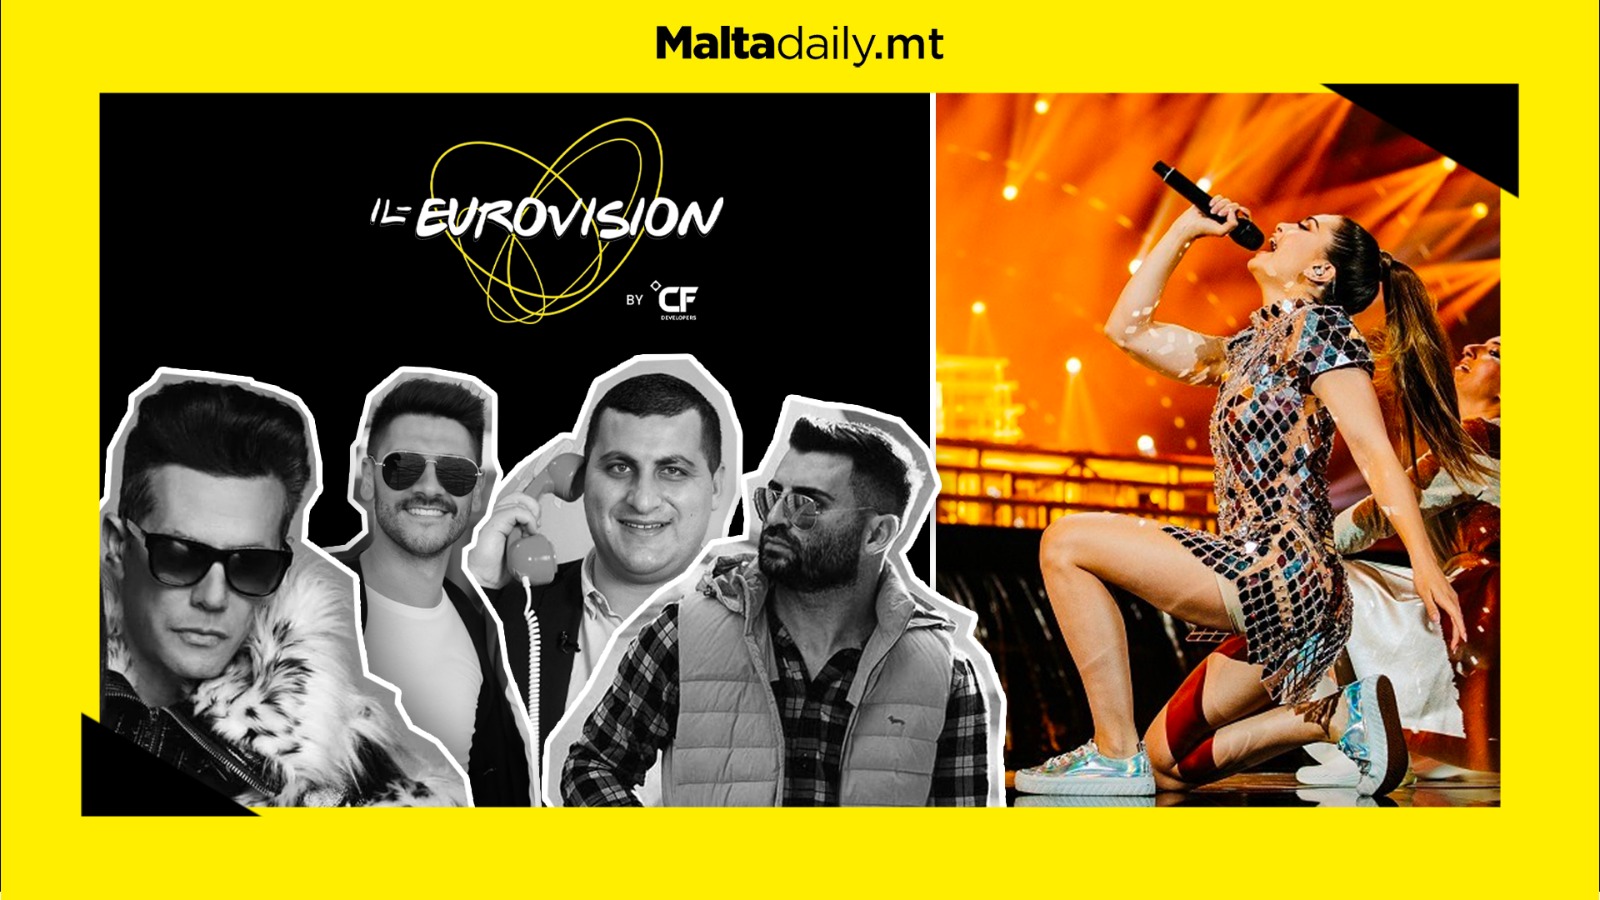 Here is MaltaDaily’s official 4-man team for Eurovision Turin 2022